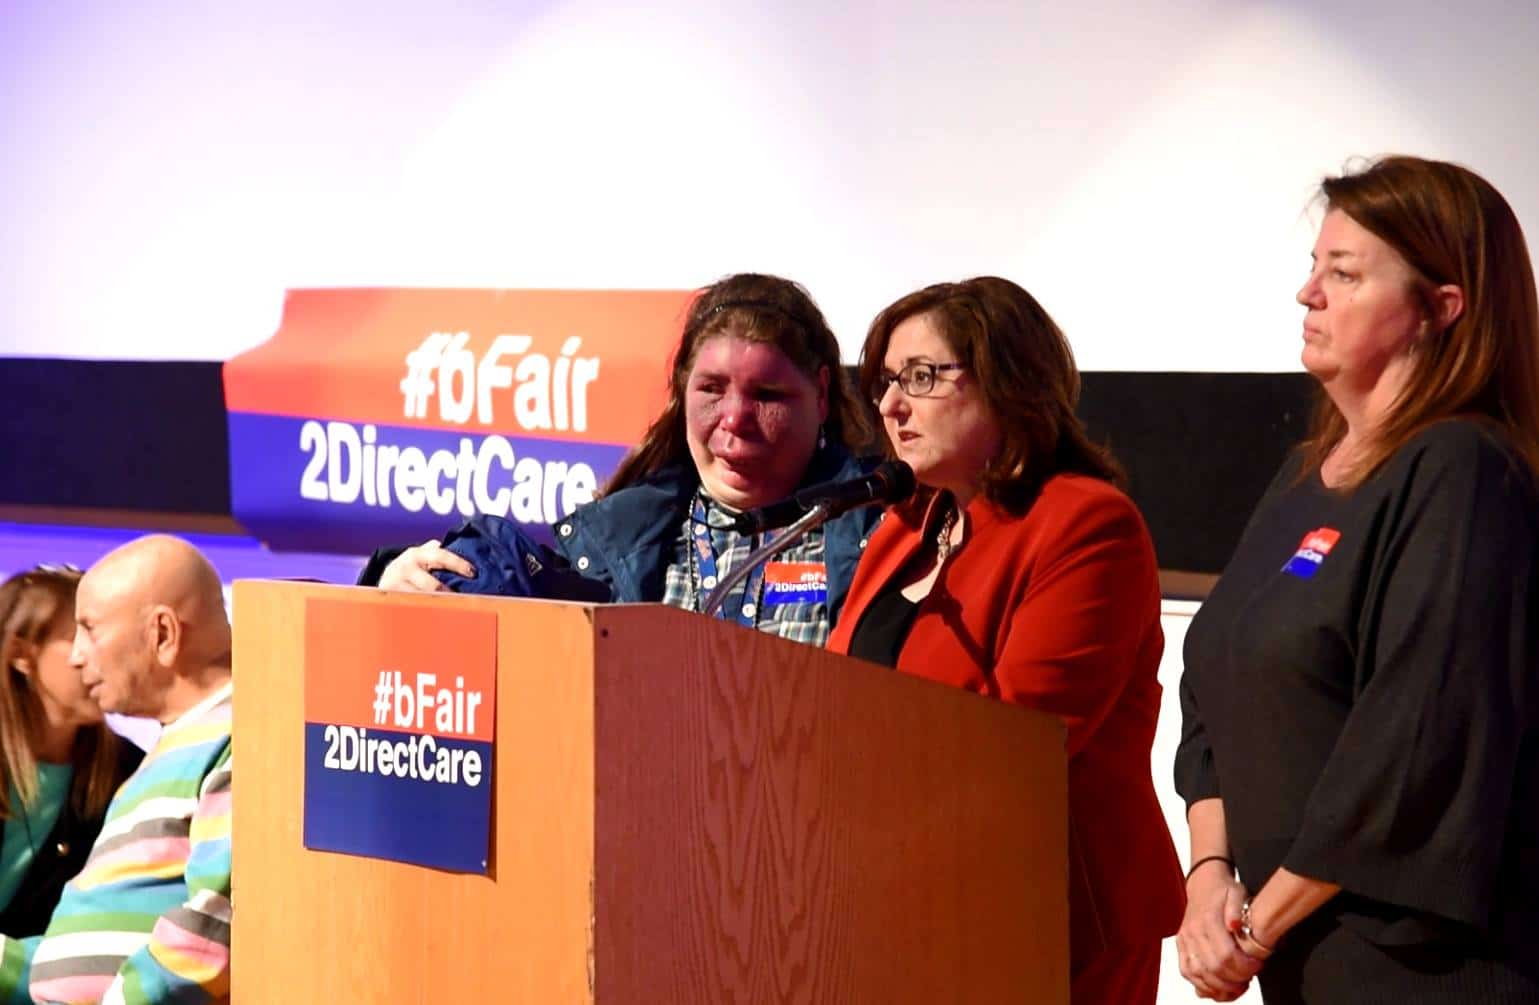 Arc New York President Saundra Gumerove and her daughter Lauren call out for #bFair2DirectCare, a higher living wage for direct support professionals